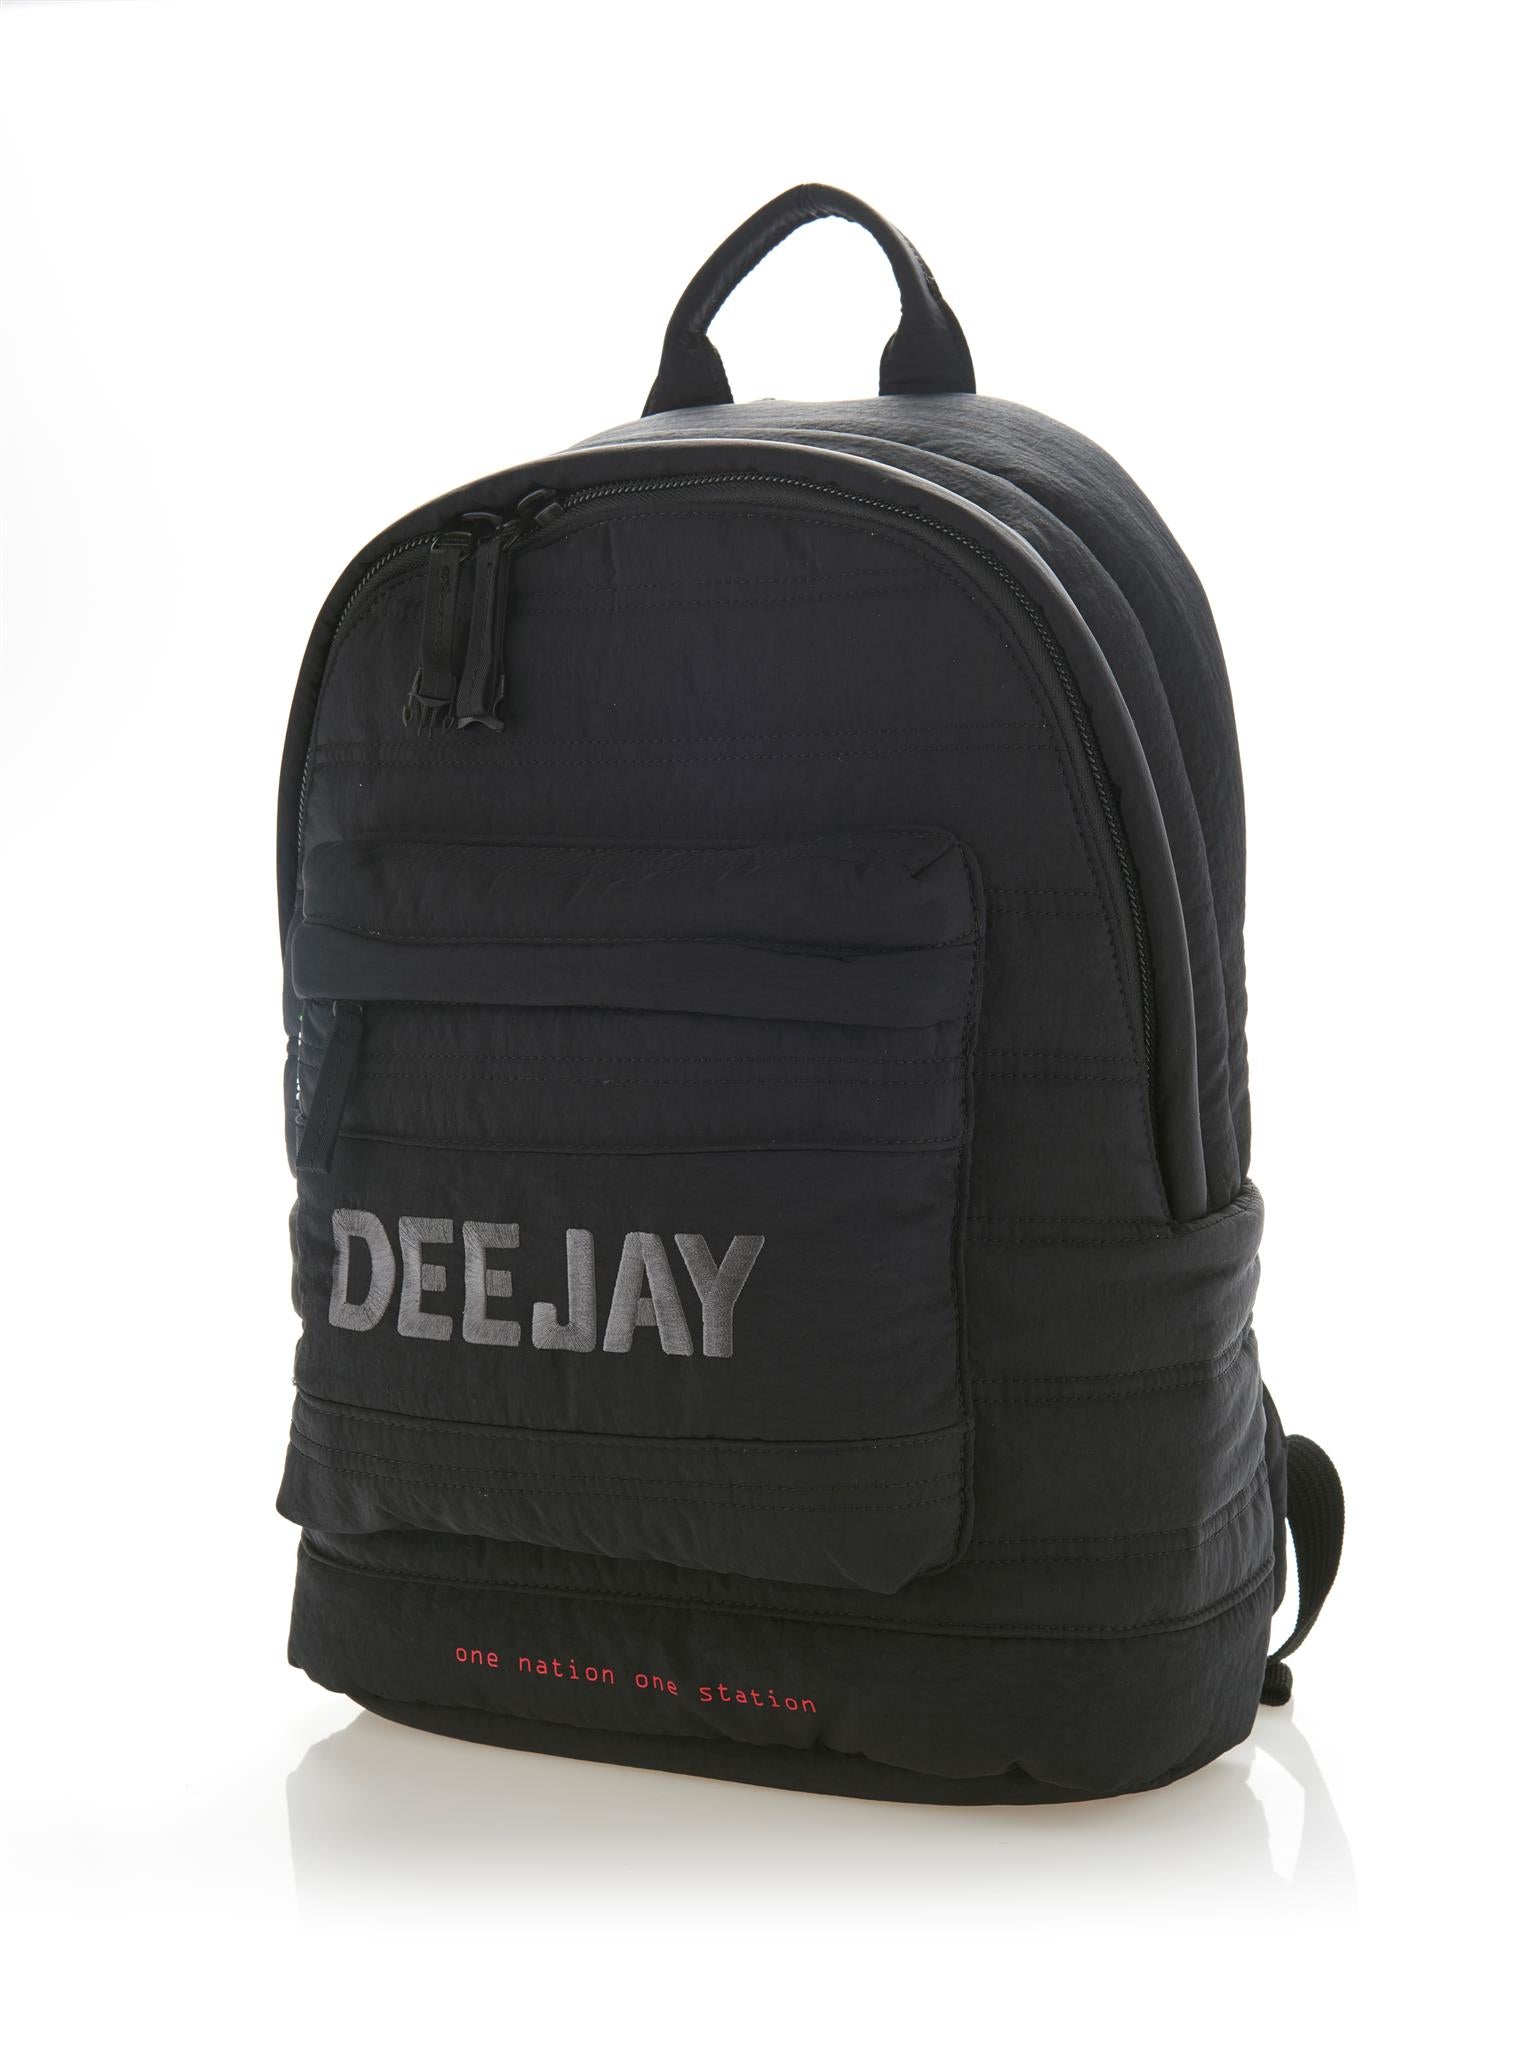 Daily backpack made with crinkle nylon, designed to keep your laptop (max 15”) safe and cushioned. Color Black, limited edition.